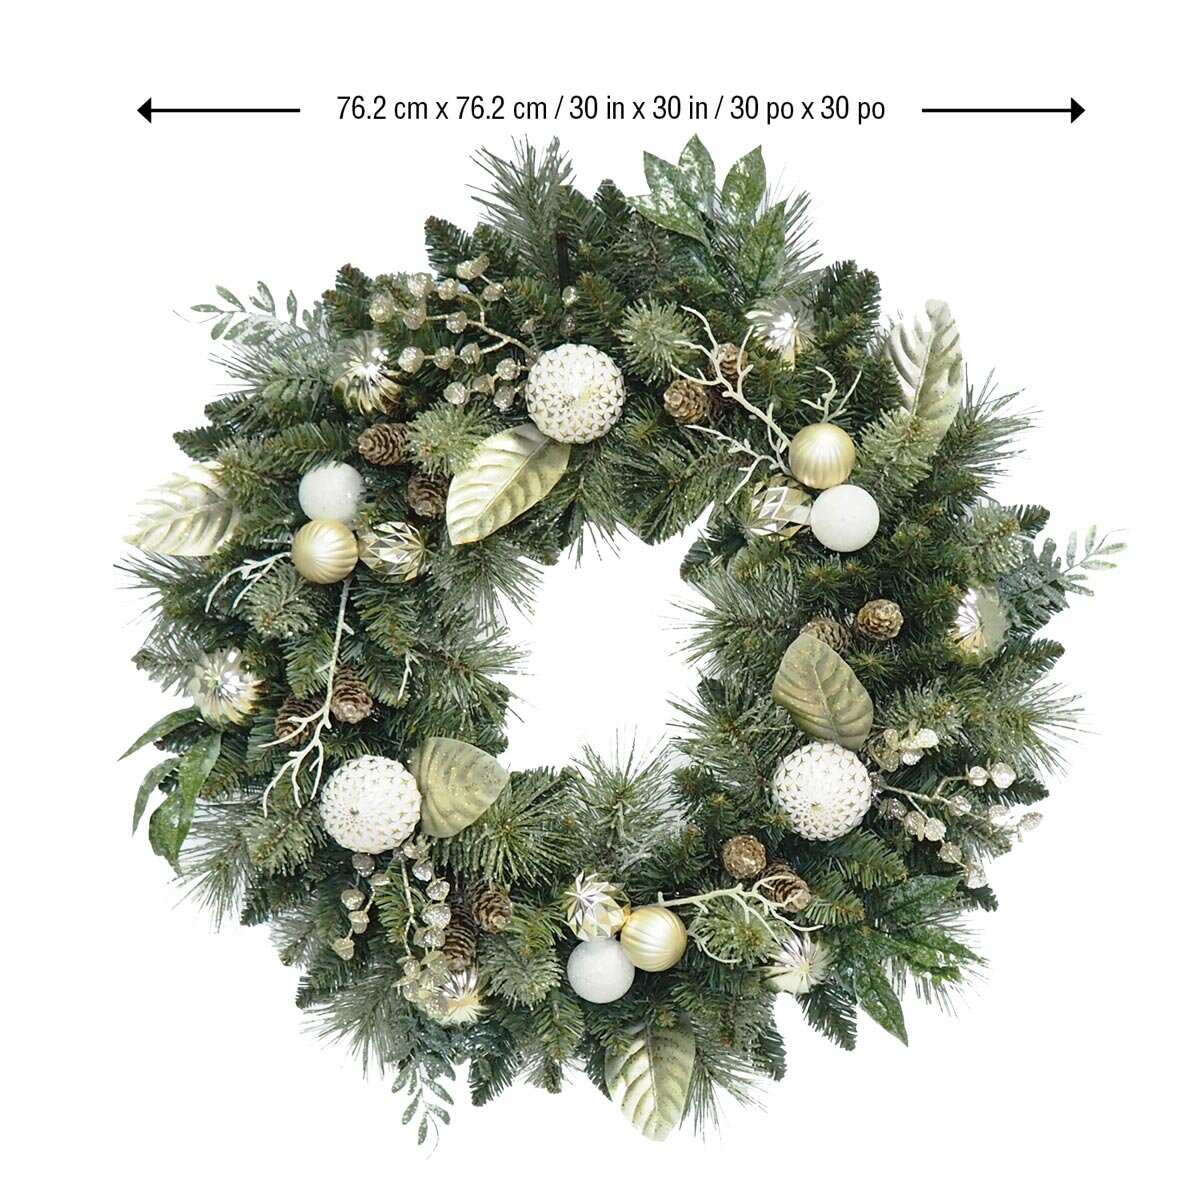 Buy 30in Wreath in Silver Dimensions Image at Costco.co.uk